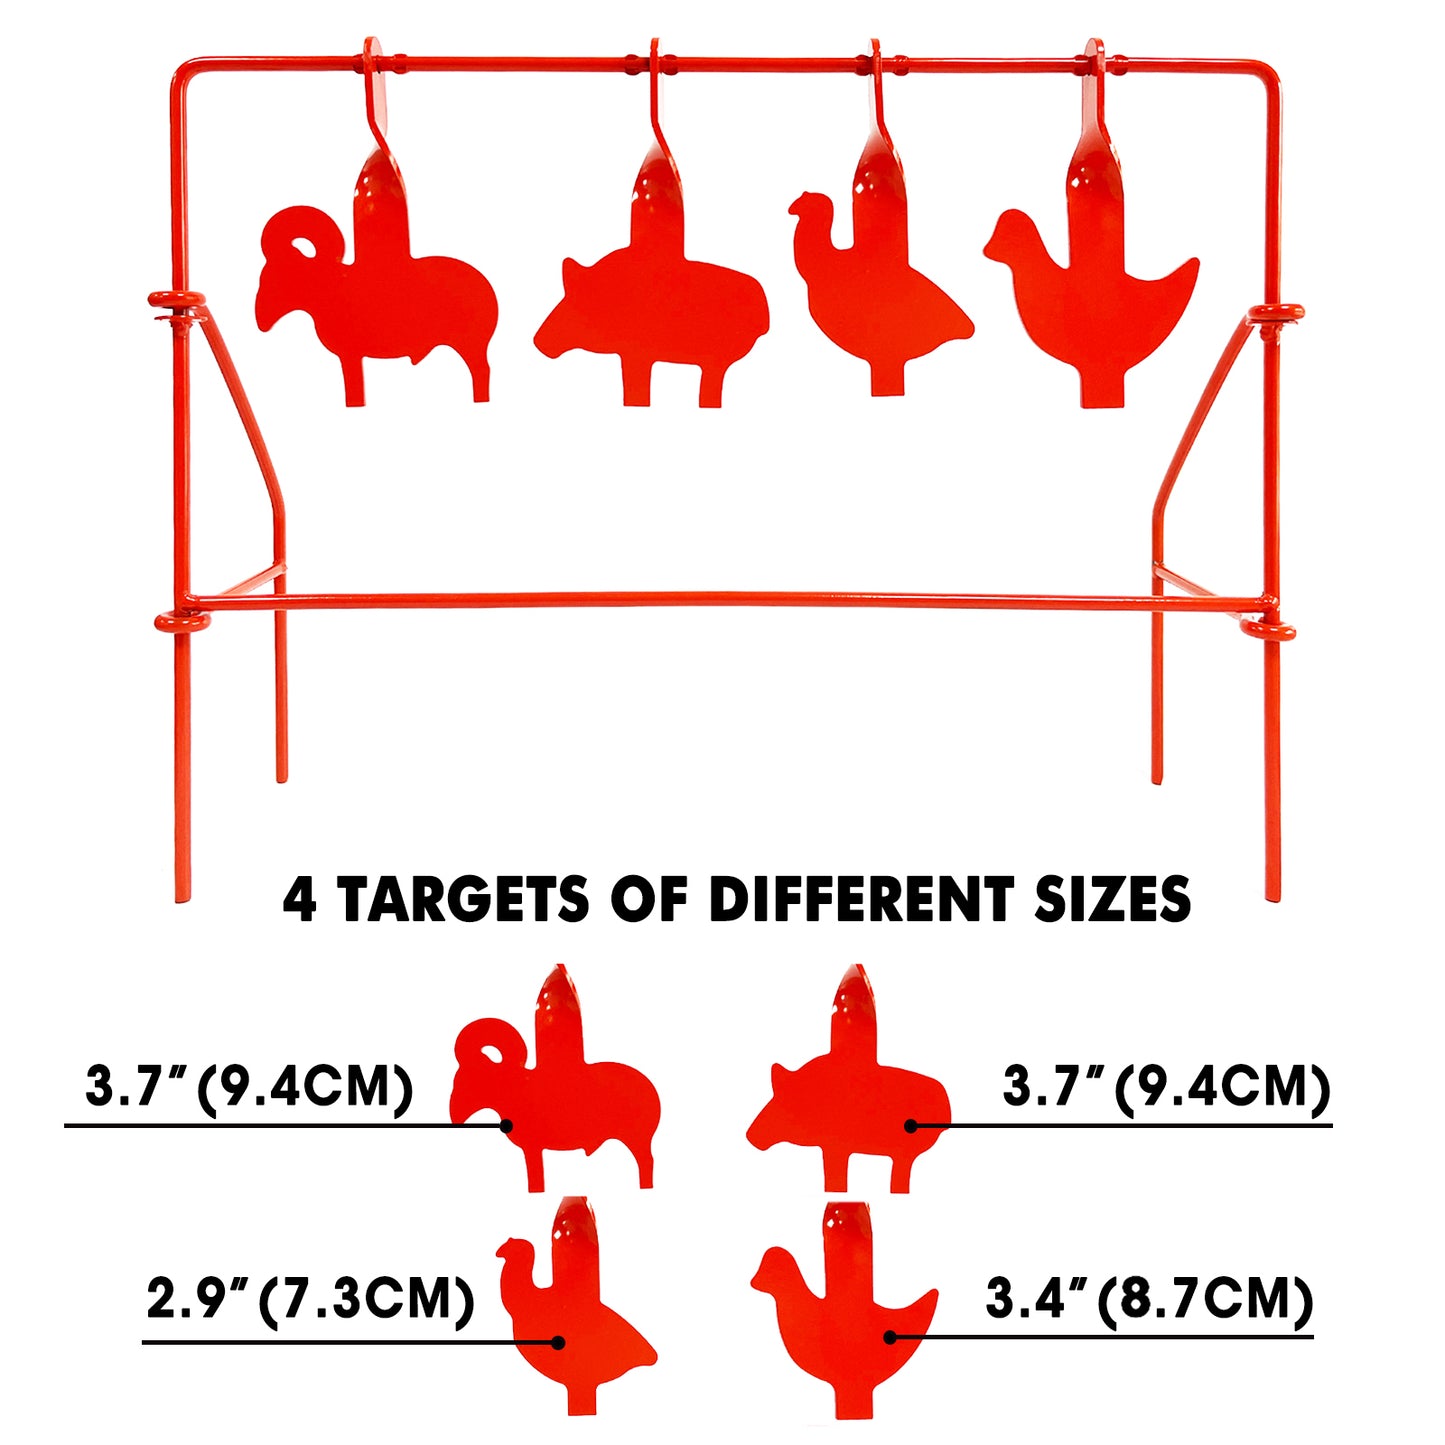 ATFLBOX BB Gun Target Animal Silhouette Heavy Metal Spinning Pellet Airsoft Shooting Target for Outdoor, Rated for .177 .20 Caliber